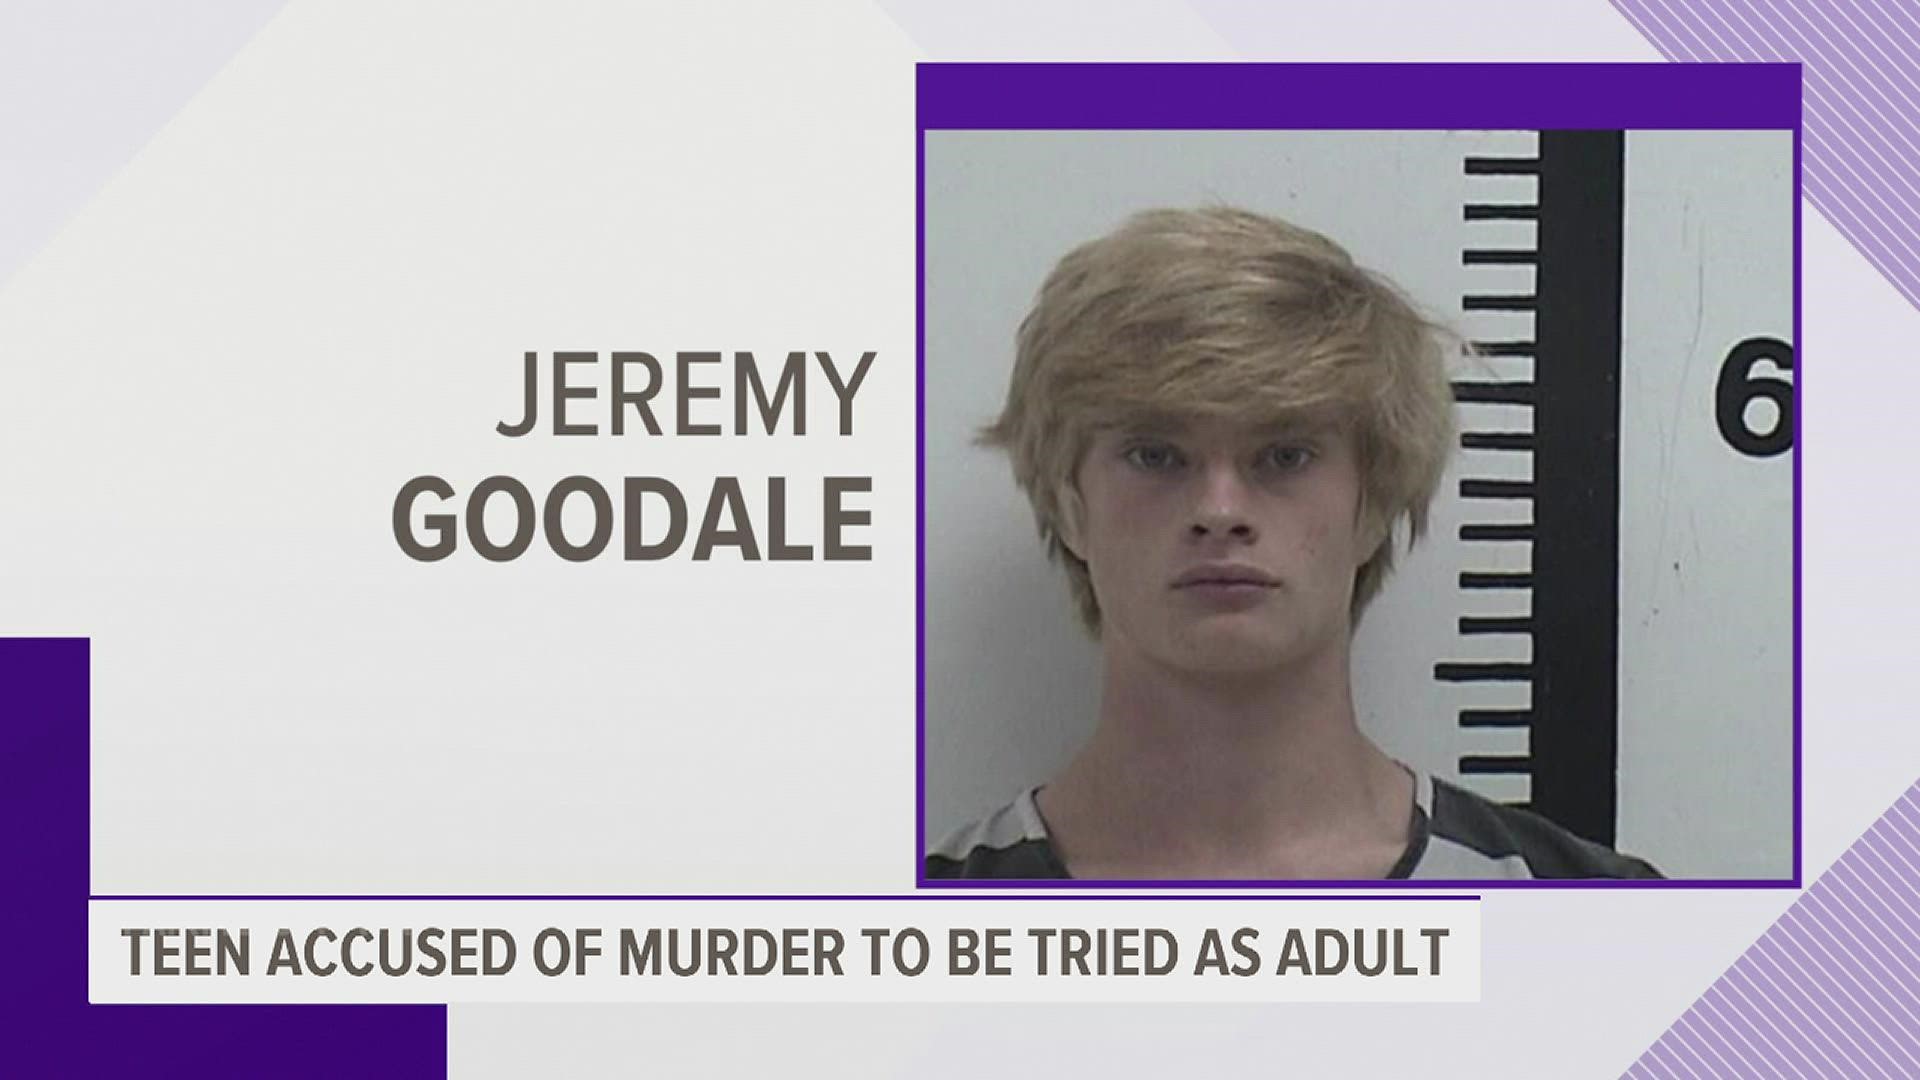 According to court documents, the judge decided Jeremy Goodale's attorneys did not show there is "good cause" to approve the request.